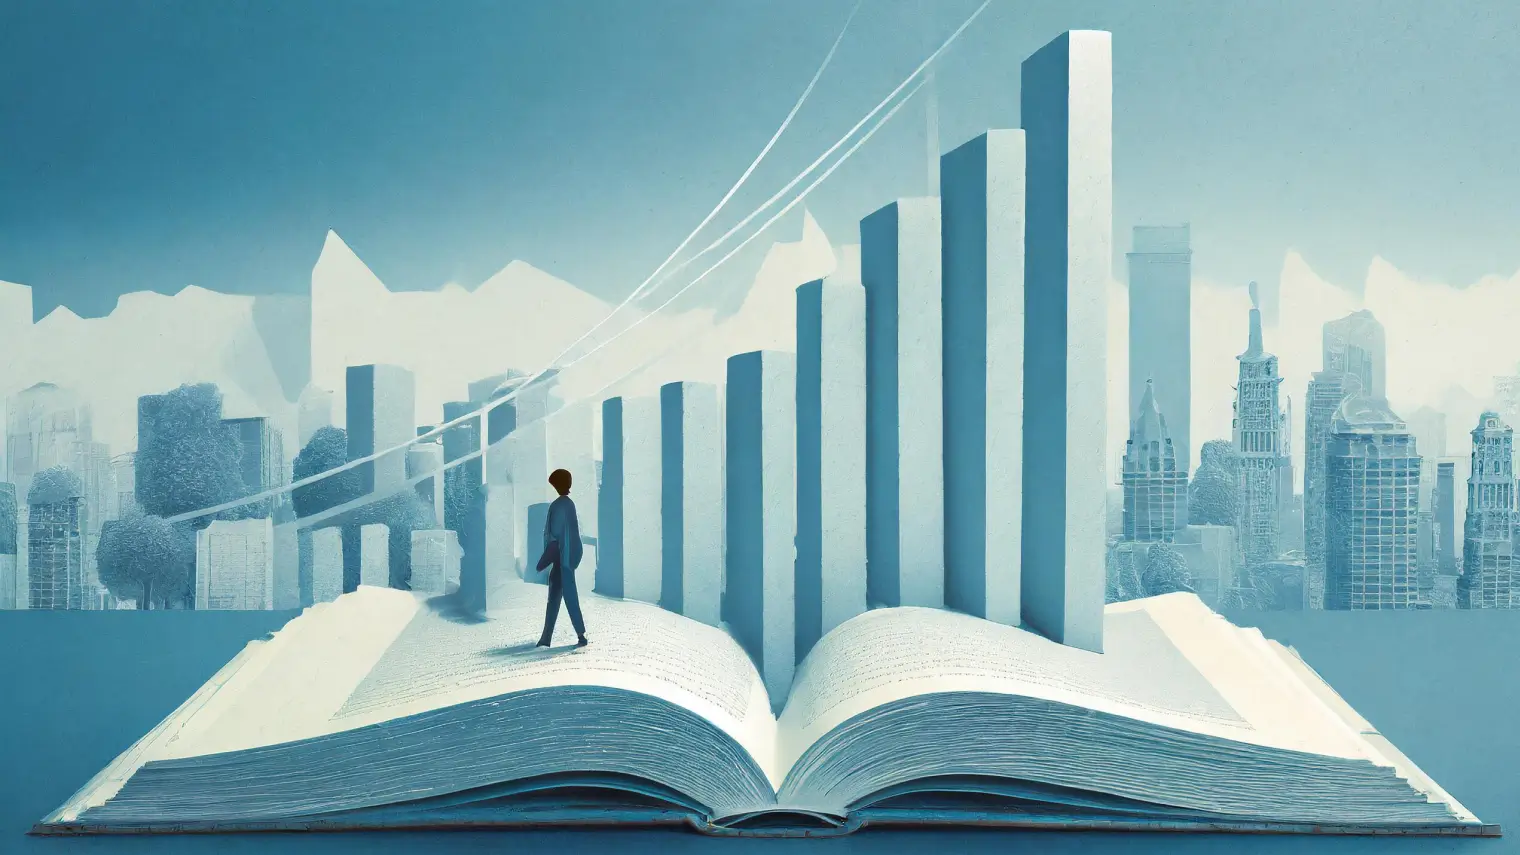 A conceptual image of a person looking at a 3D bar chart cityscape rising from an open book.